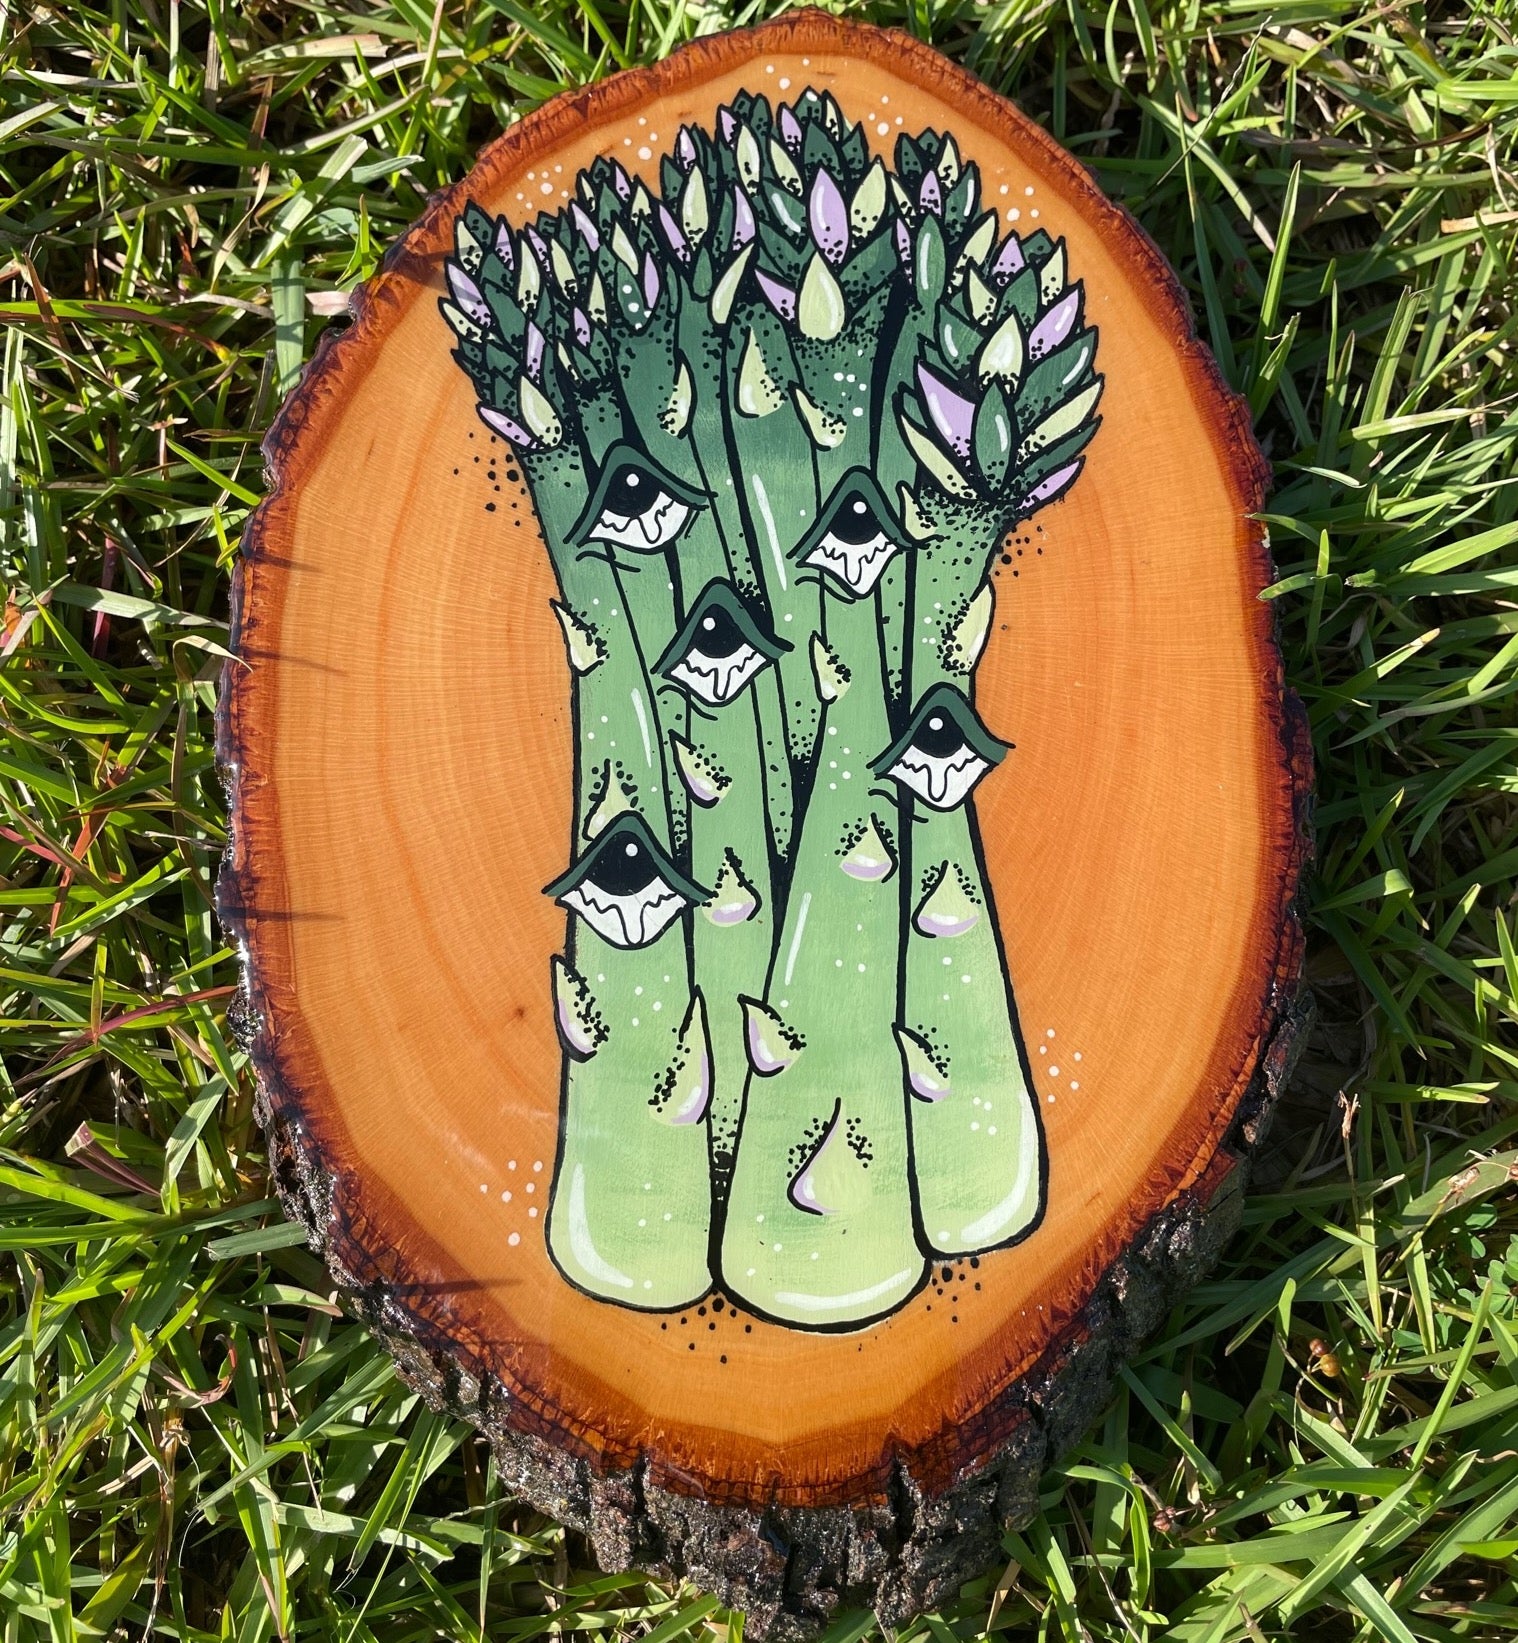 A photo of Louisiana artist, Tristen Rolling's original acrylic painting of a bunch of asparagus on a round slice of oak wood. The painting is coated in a layer of epoxy resin and reflects Tristen's love for Louisiana farmers markets.  